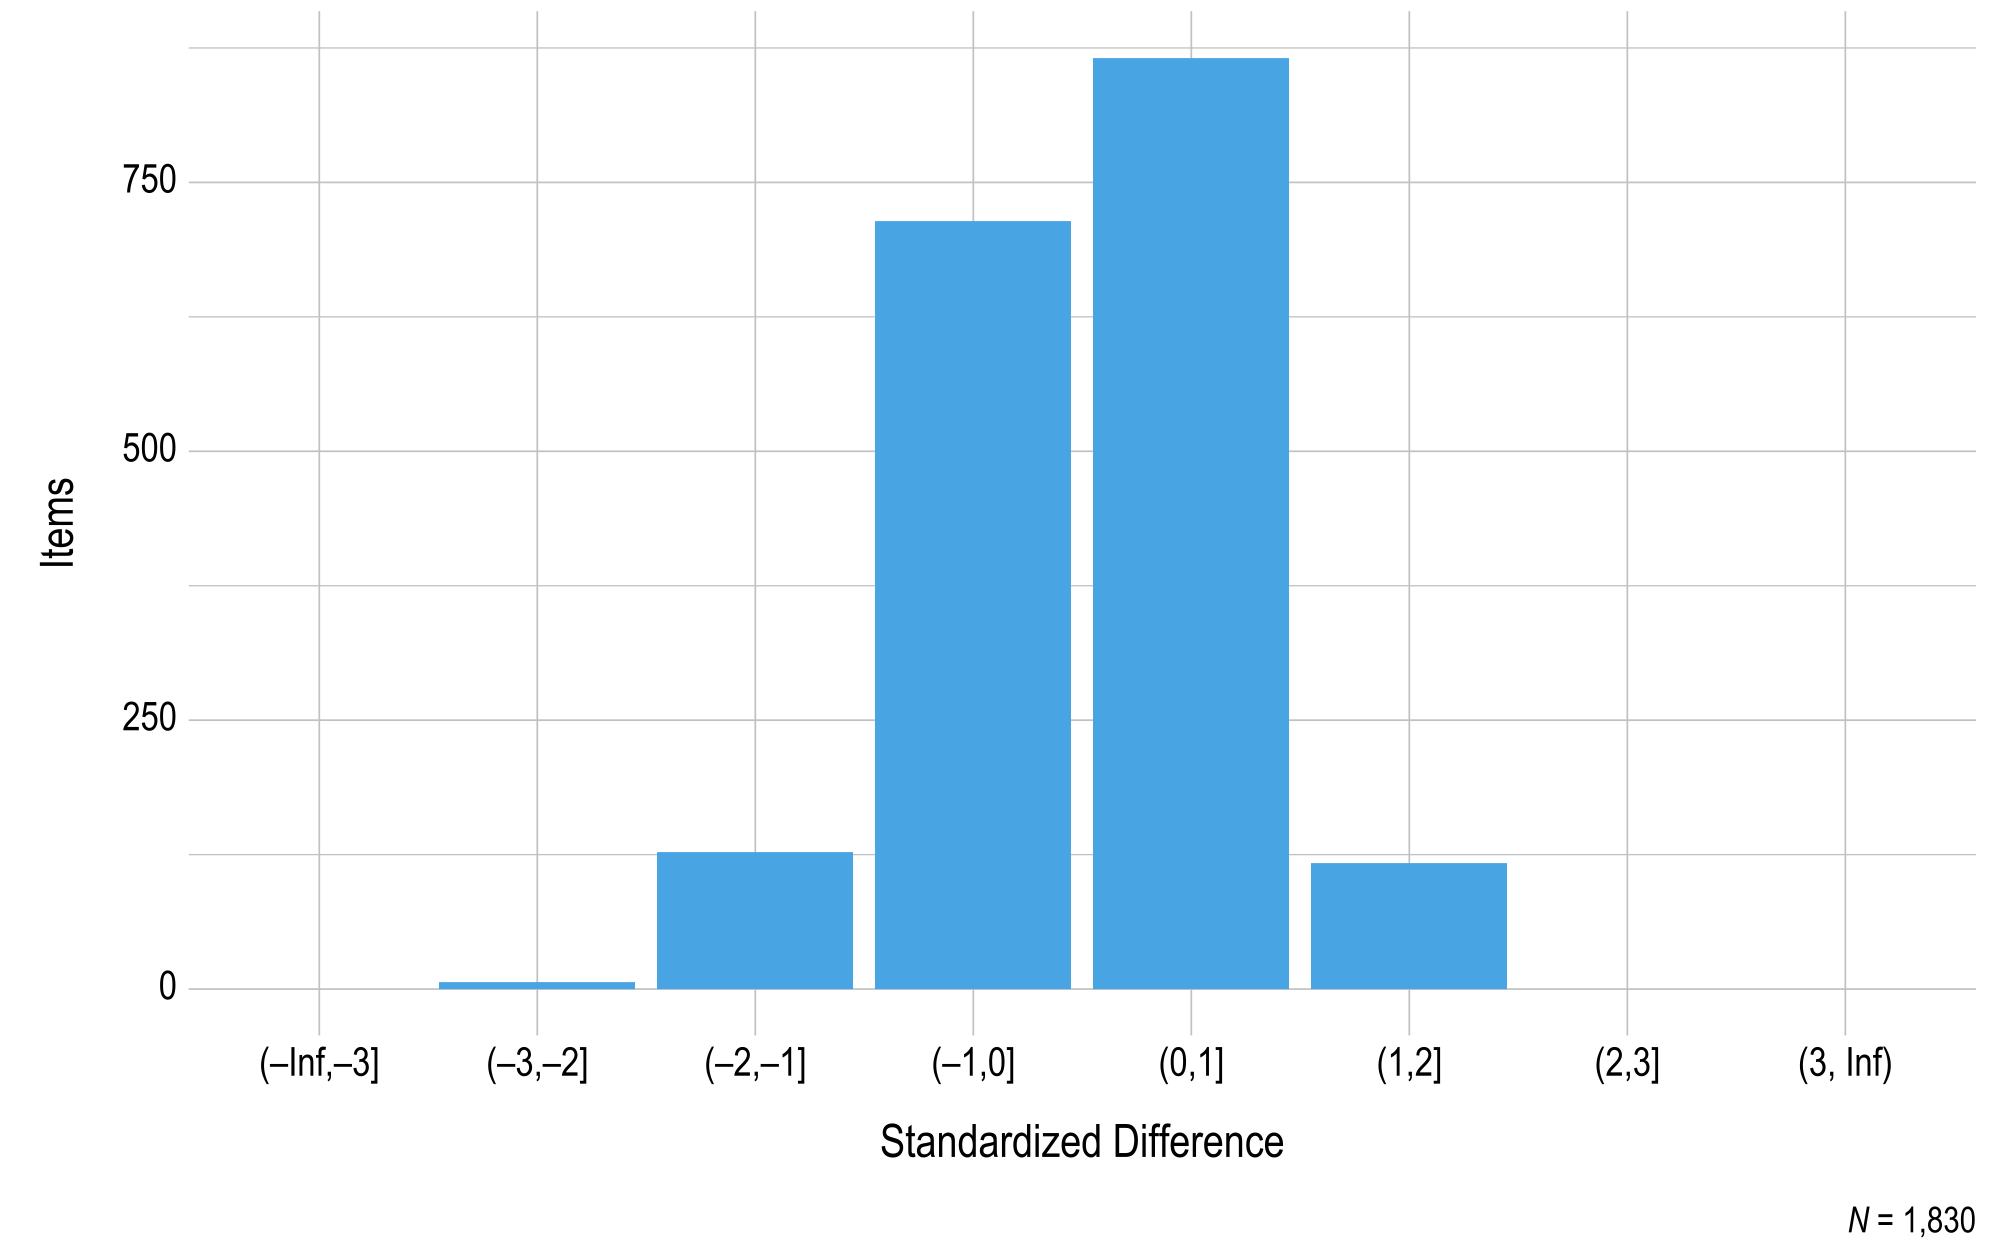 This figure contains a histogram displaying standardized difference on the x-axis and the number of science field test items on the y-axis.